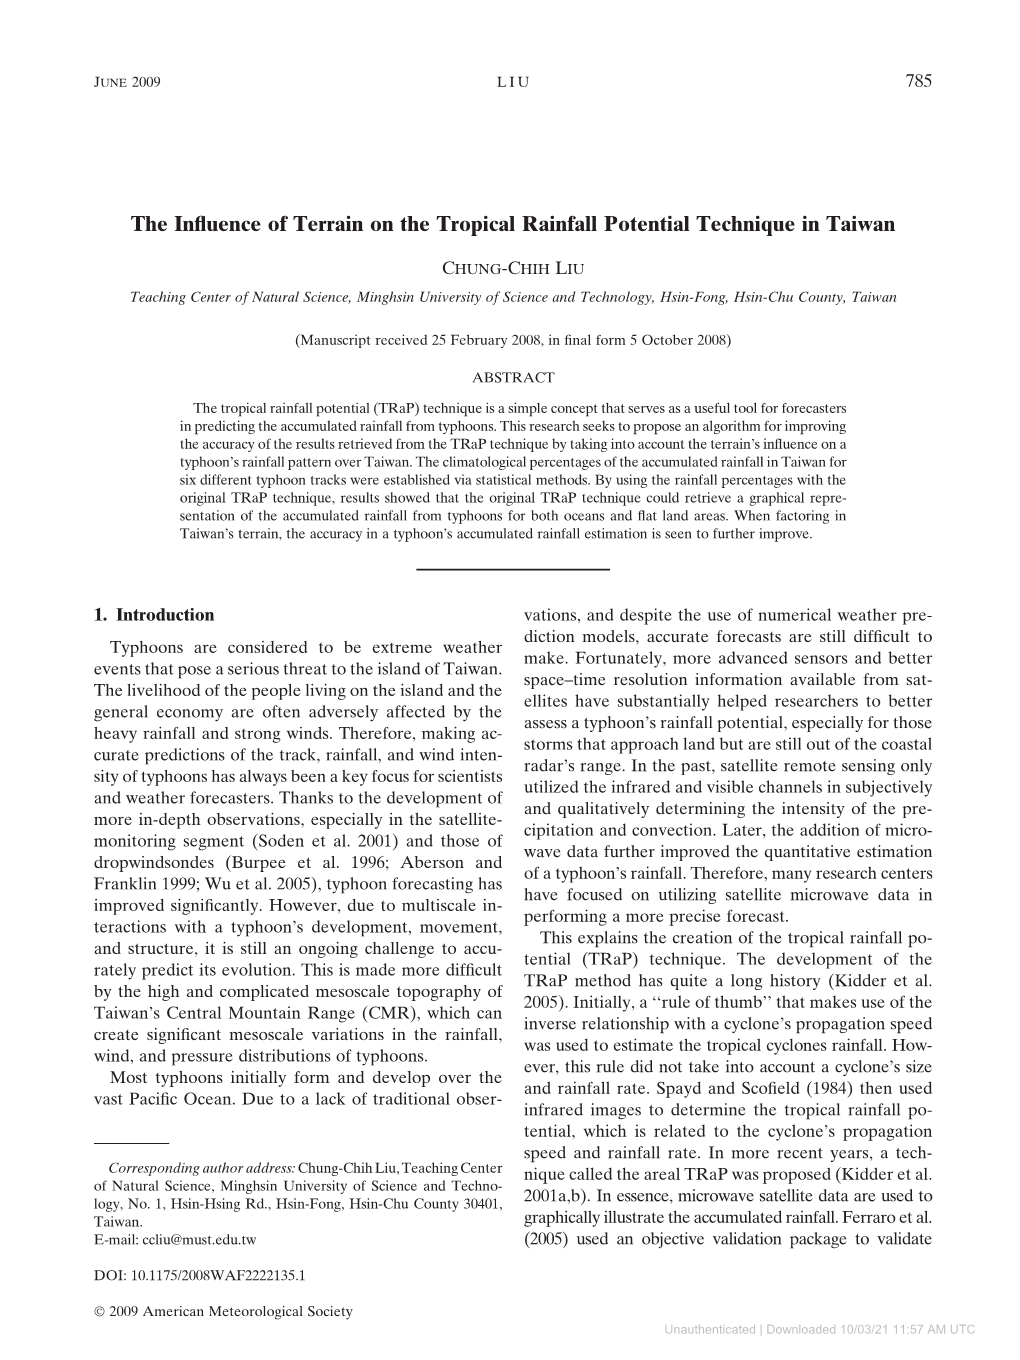 The Influence of Terrain on the Tropical Rainfall Potential